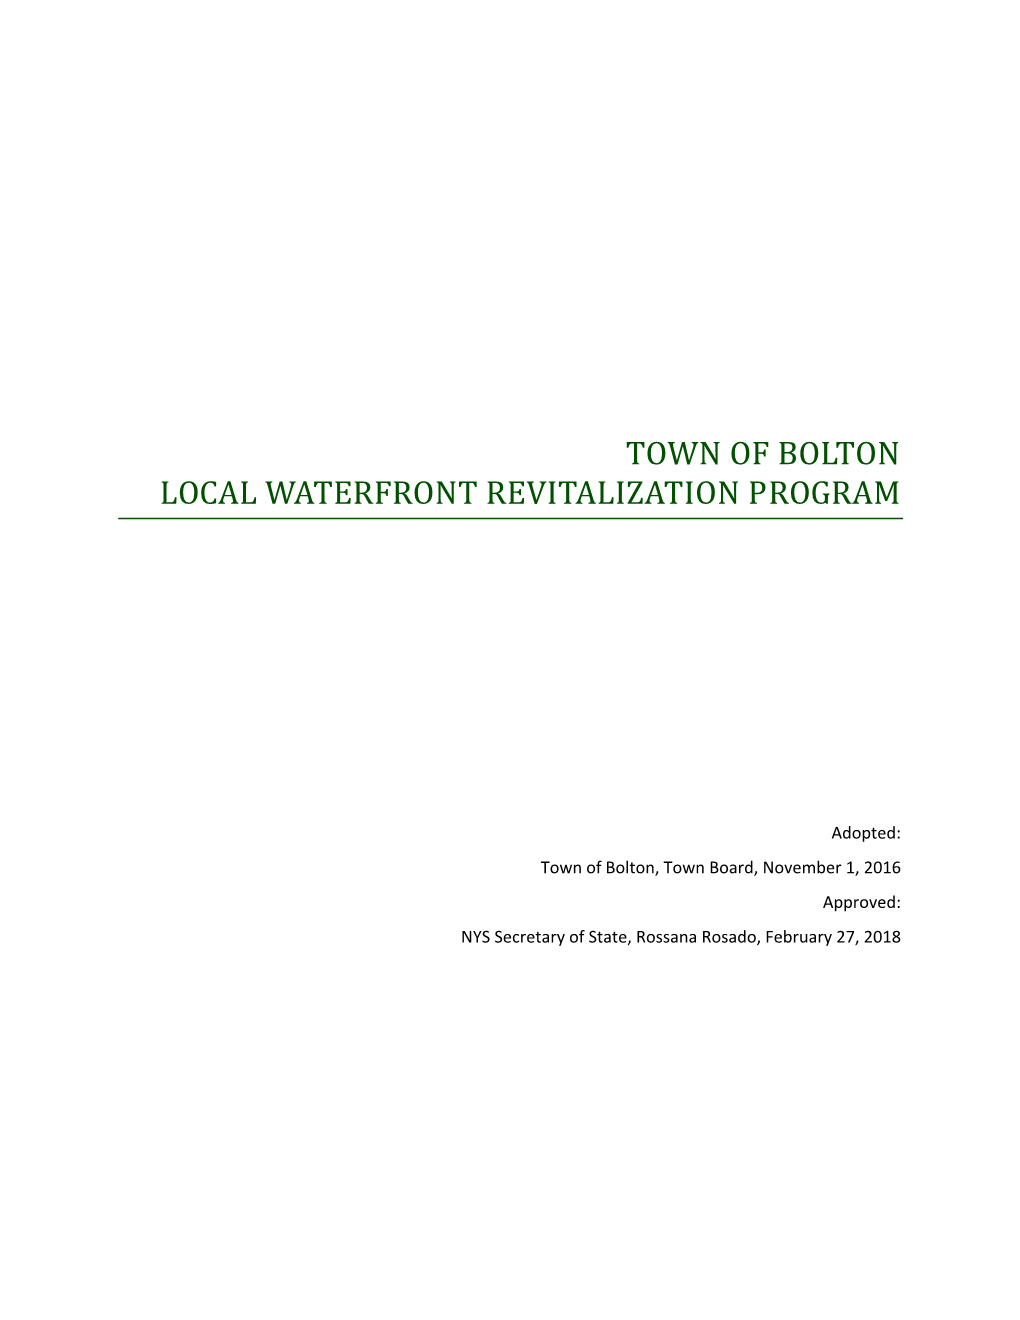 Town of Bolton Local Waterfront Revitalization Program